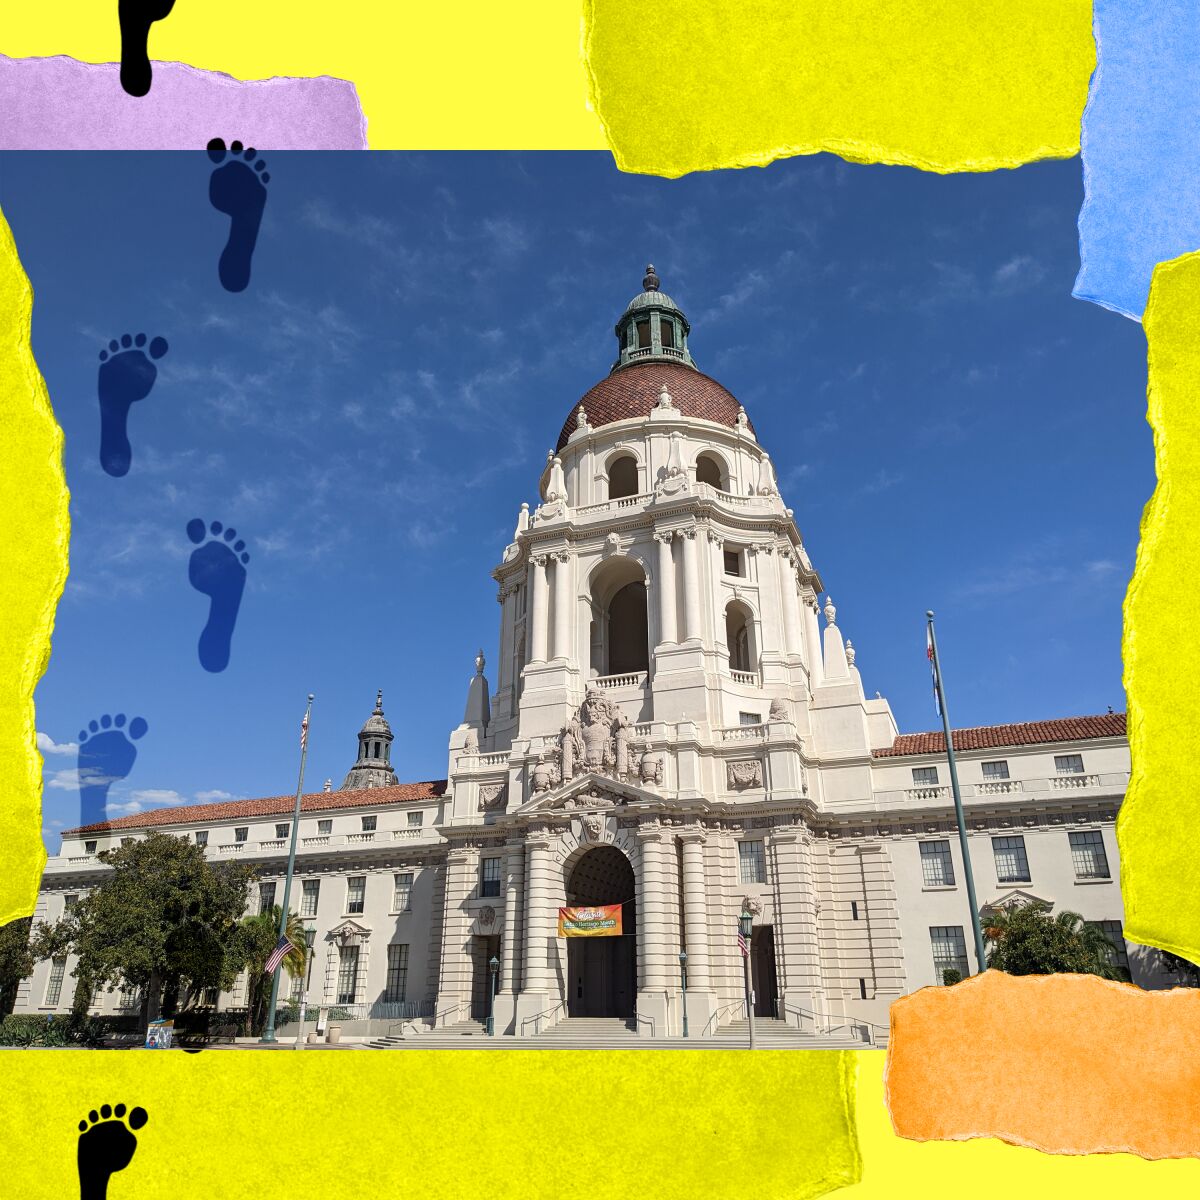 Explore Pasadena on foot with Walktober 2022 events this weekend and throughout the month.